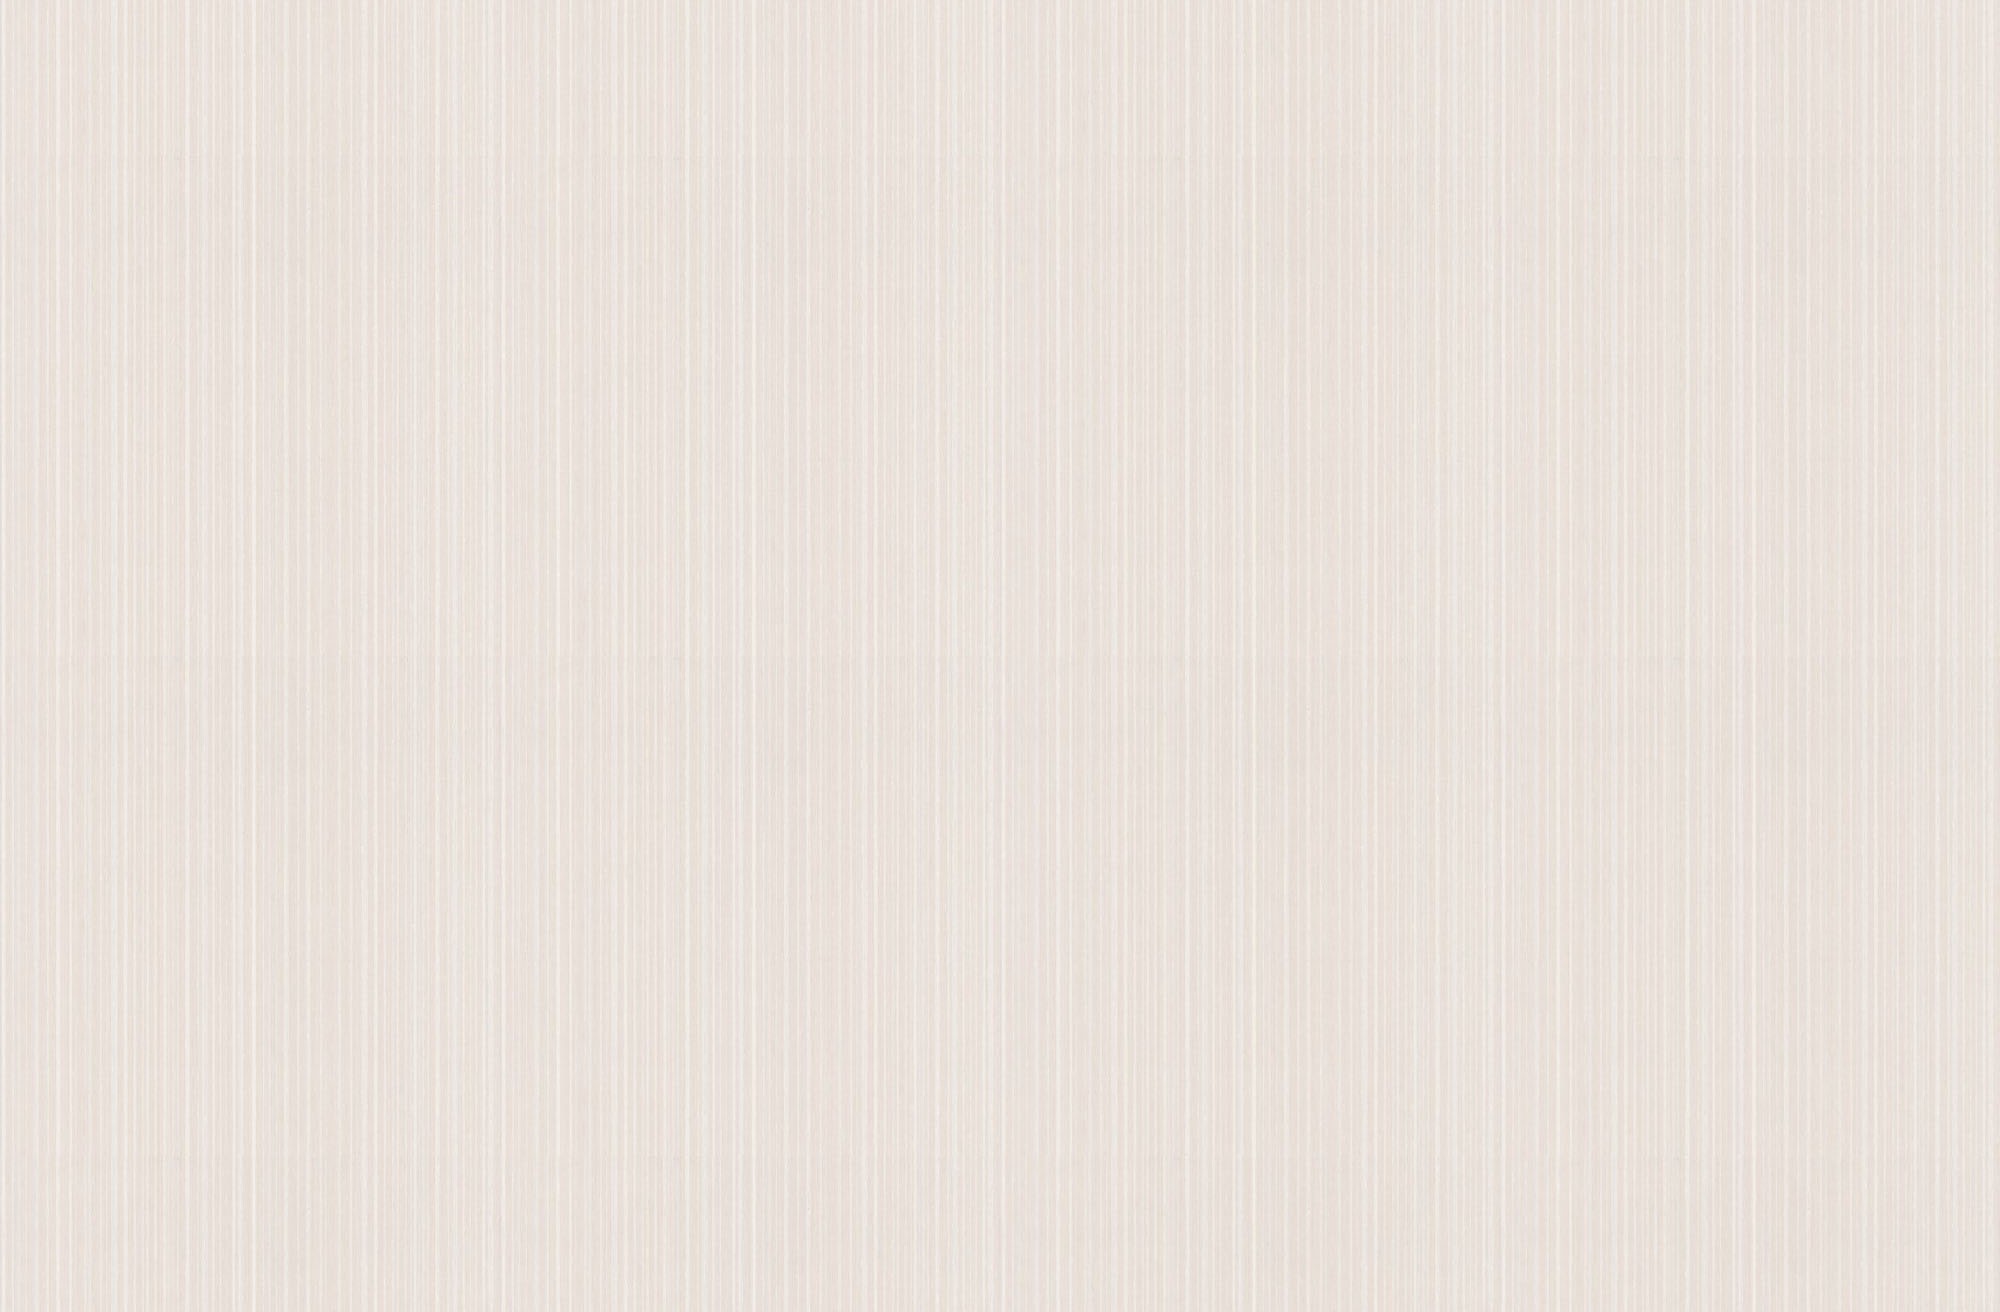 Ancient Beige Background Cream Color Quaint Background Image And  Wallpaper for Free Download  Wallpaper backgrounds Seamless wallpaper  Beige background